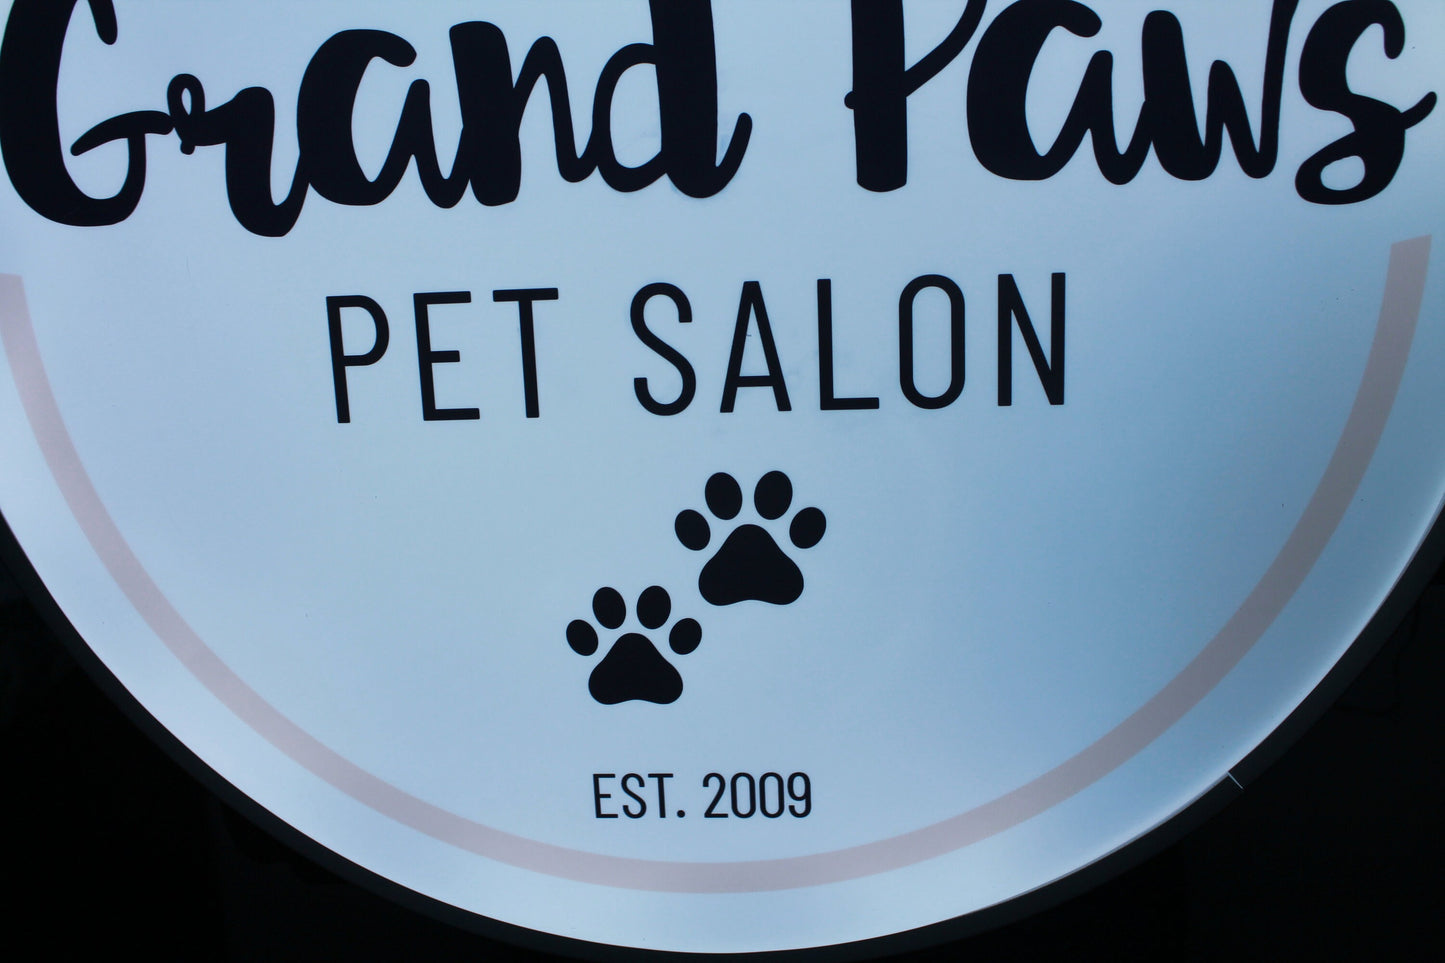 Custom Outdoor Pet Salon Paws Round Led Light Blade Sign Wall or Ceiling Mounted Circle Light Sign Store Front Commerical Signage Logo